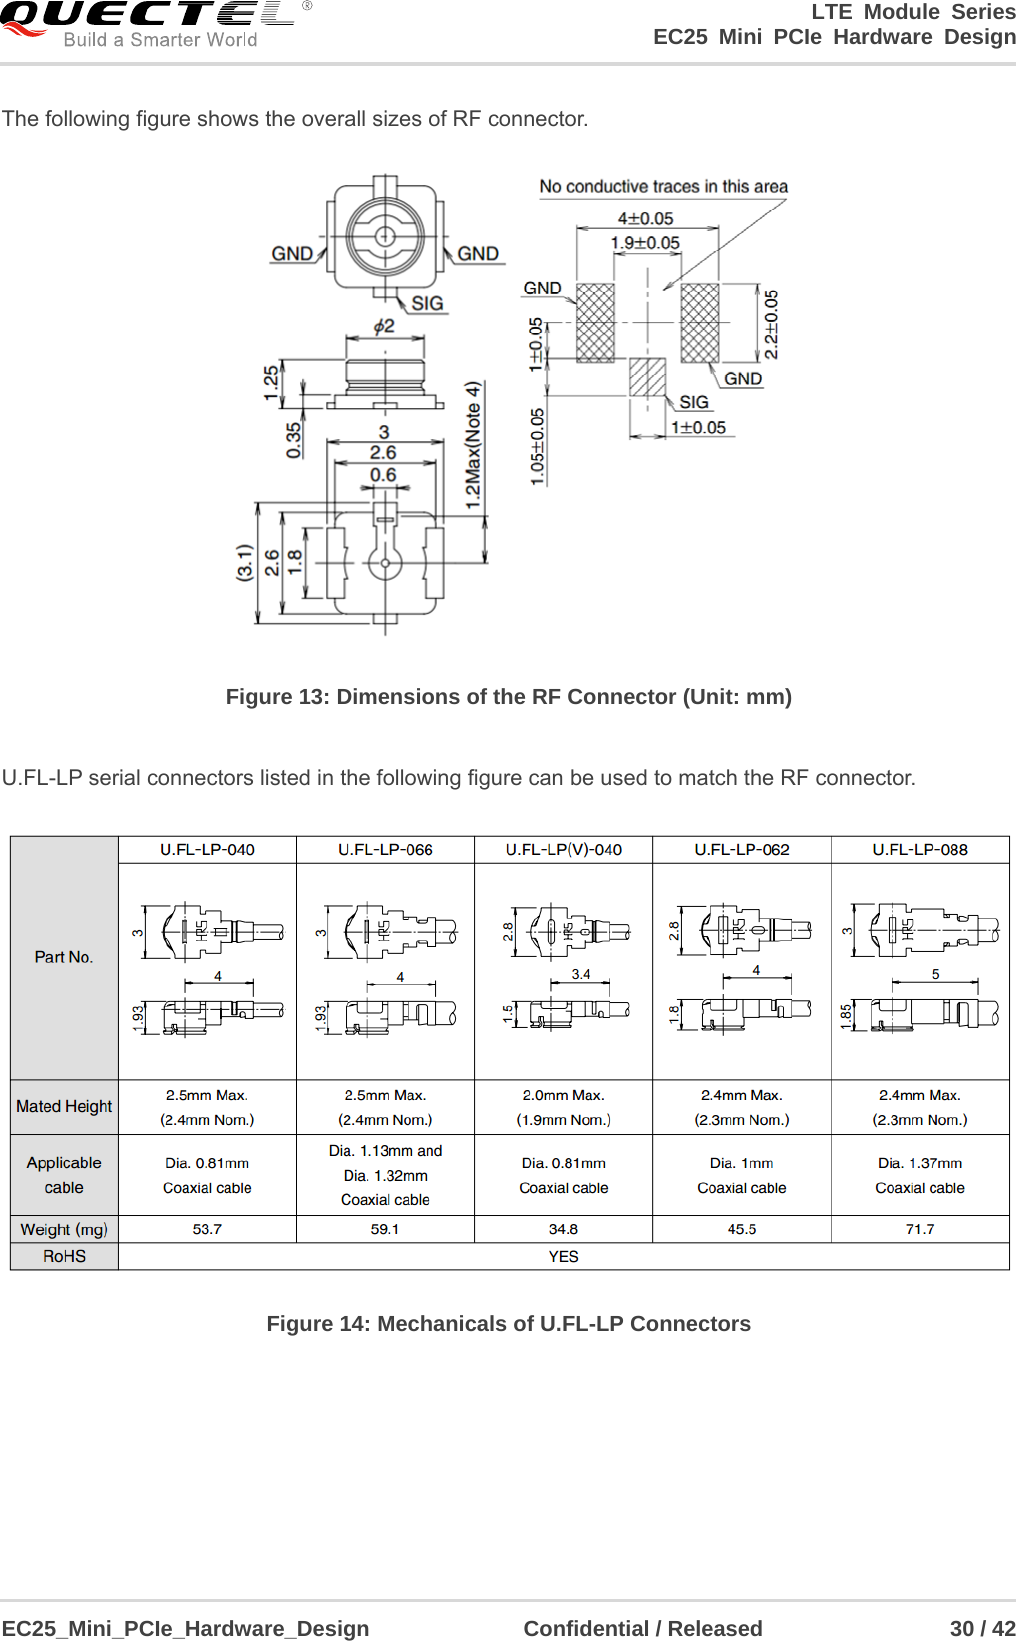                                        LTE Module Series                                                  EC25 Mini PCIe Hardware Design  EC25_Mini_PCIe_Hardware_Design              Confidential / Released                 30 / 42    The following figure shows the overall sizes of RF connector.  Figure 13: Dimensions of the RF Connector (Unit: mm)    U.FL-LP serial connectors listed in the following figure can be used to match the RF connector.    Figure 14: Mechanicals of U.FL-LP Connectors 